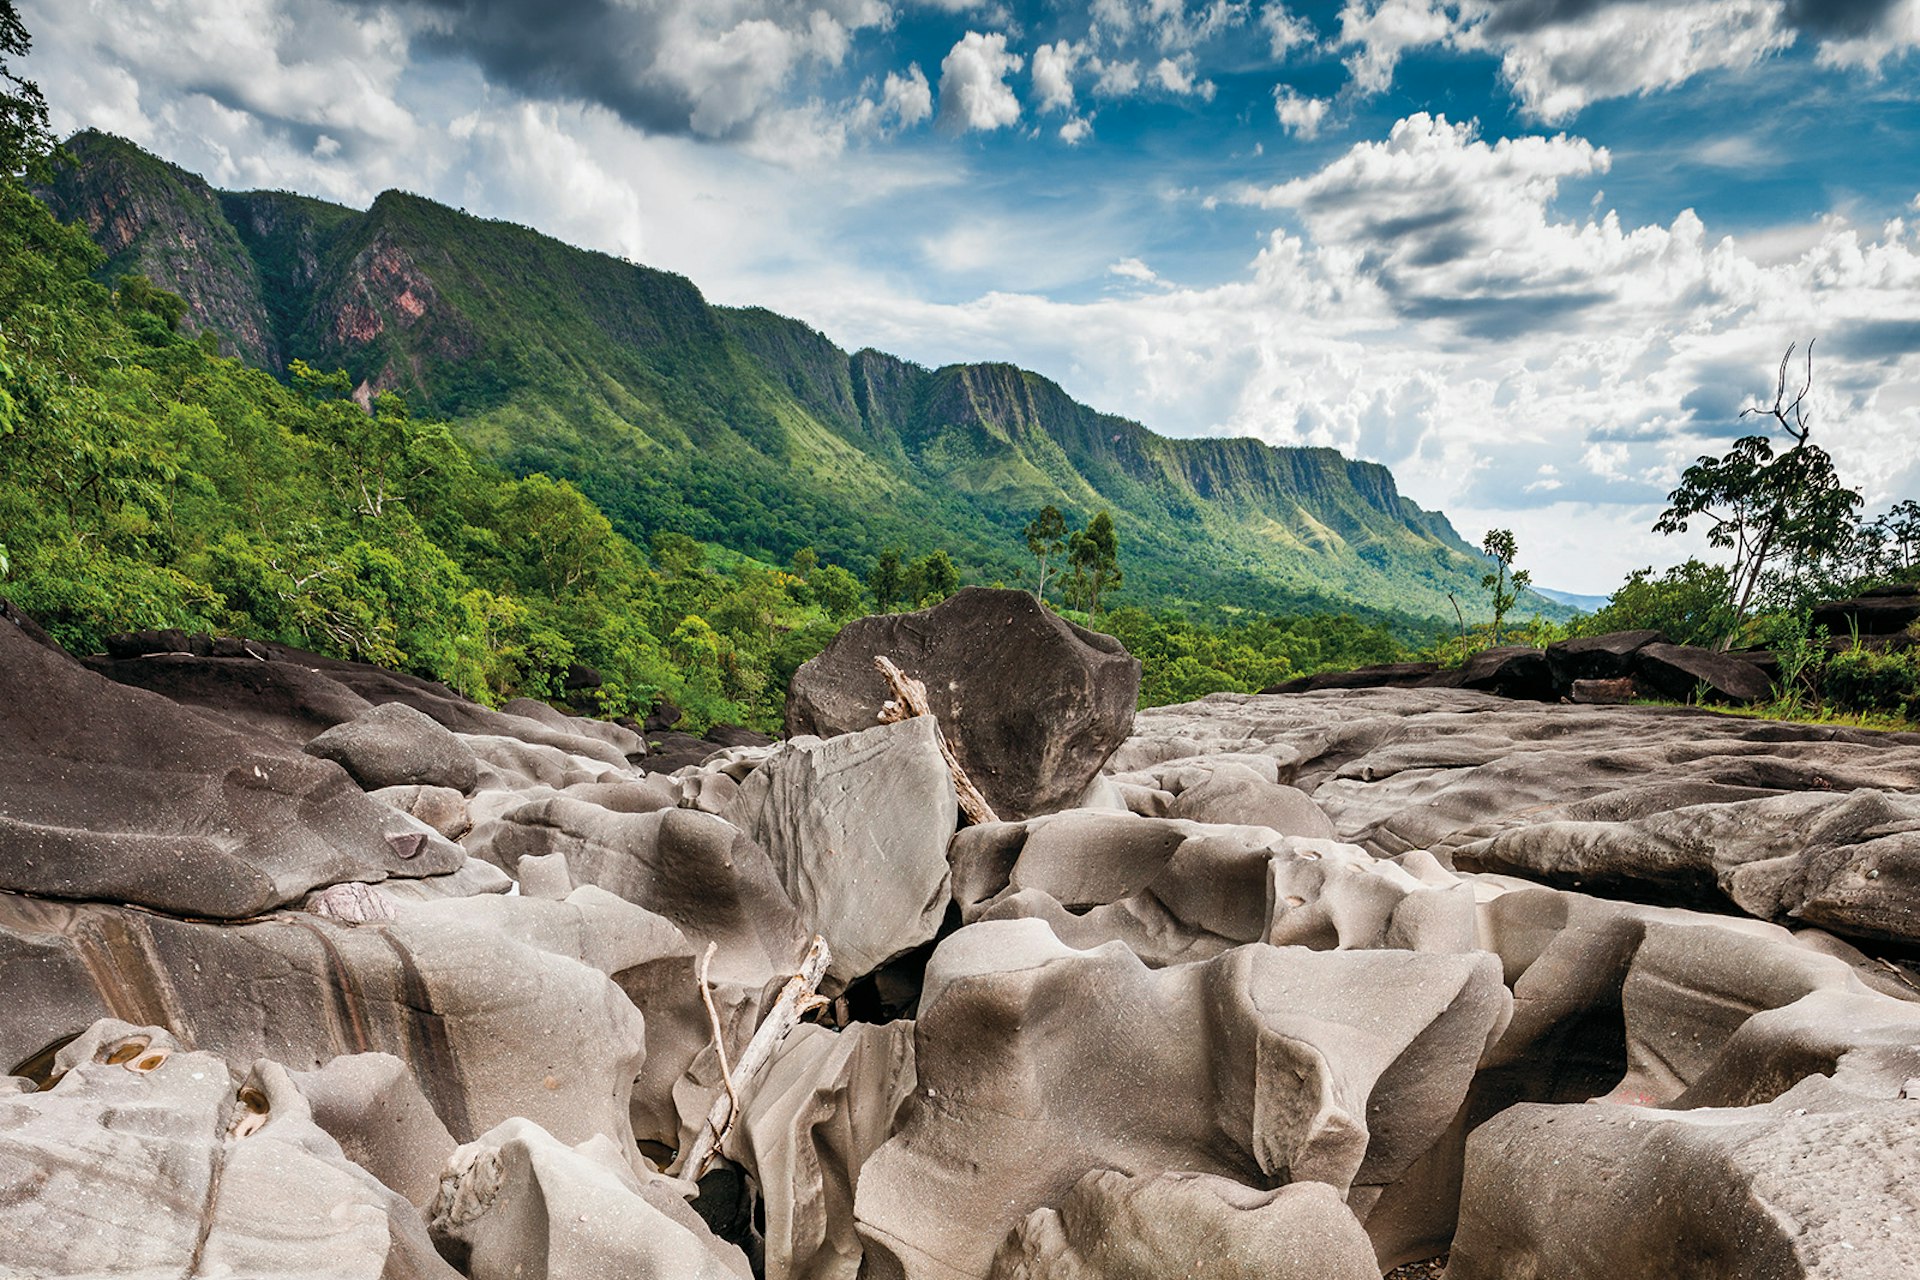 Rock formations and verdant mountains in Brazil’s Vale da Lua © Vitormarigo / Getty Images